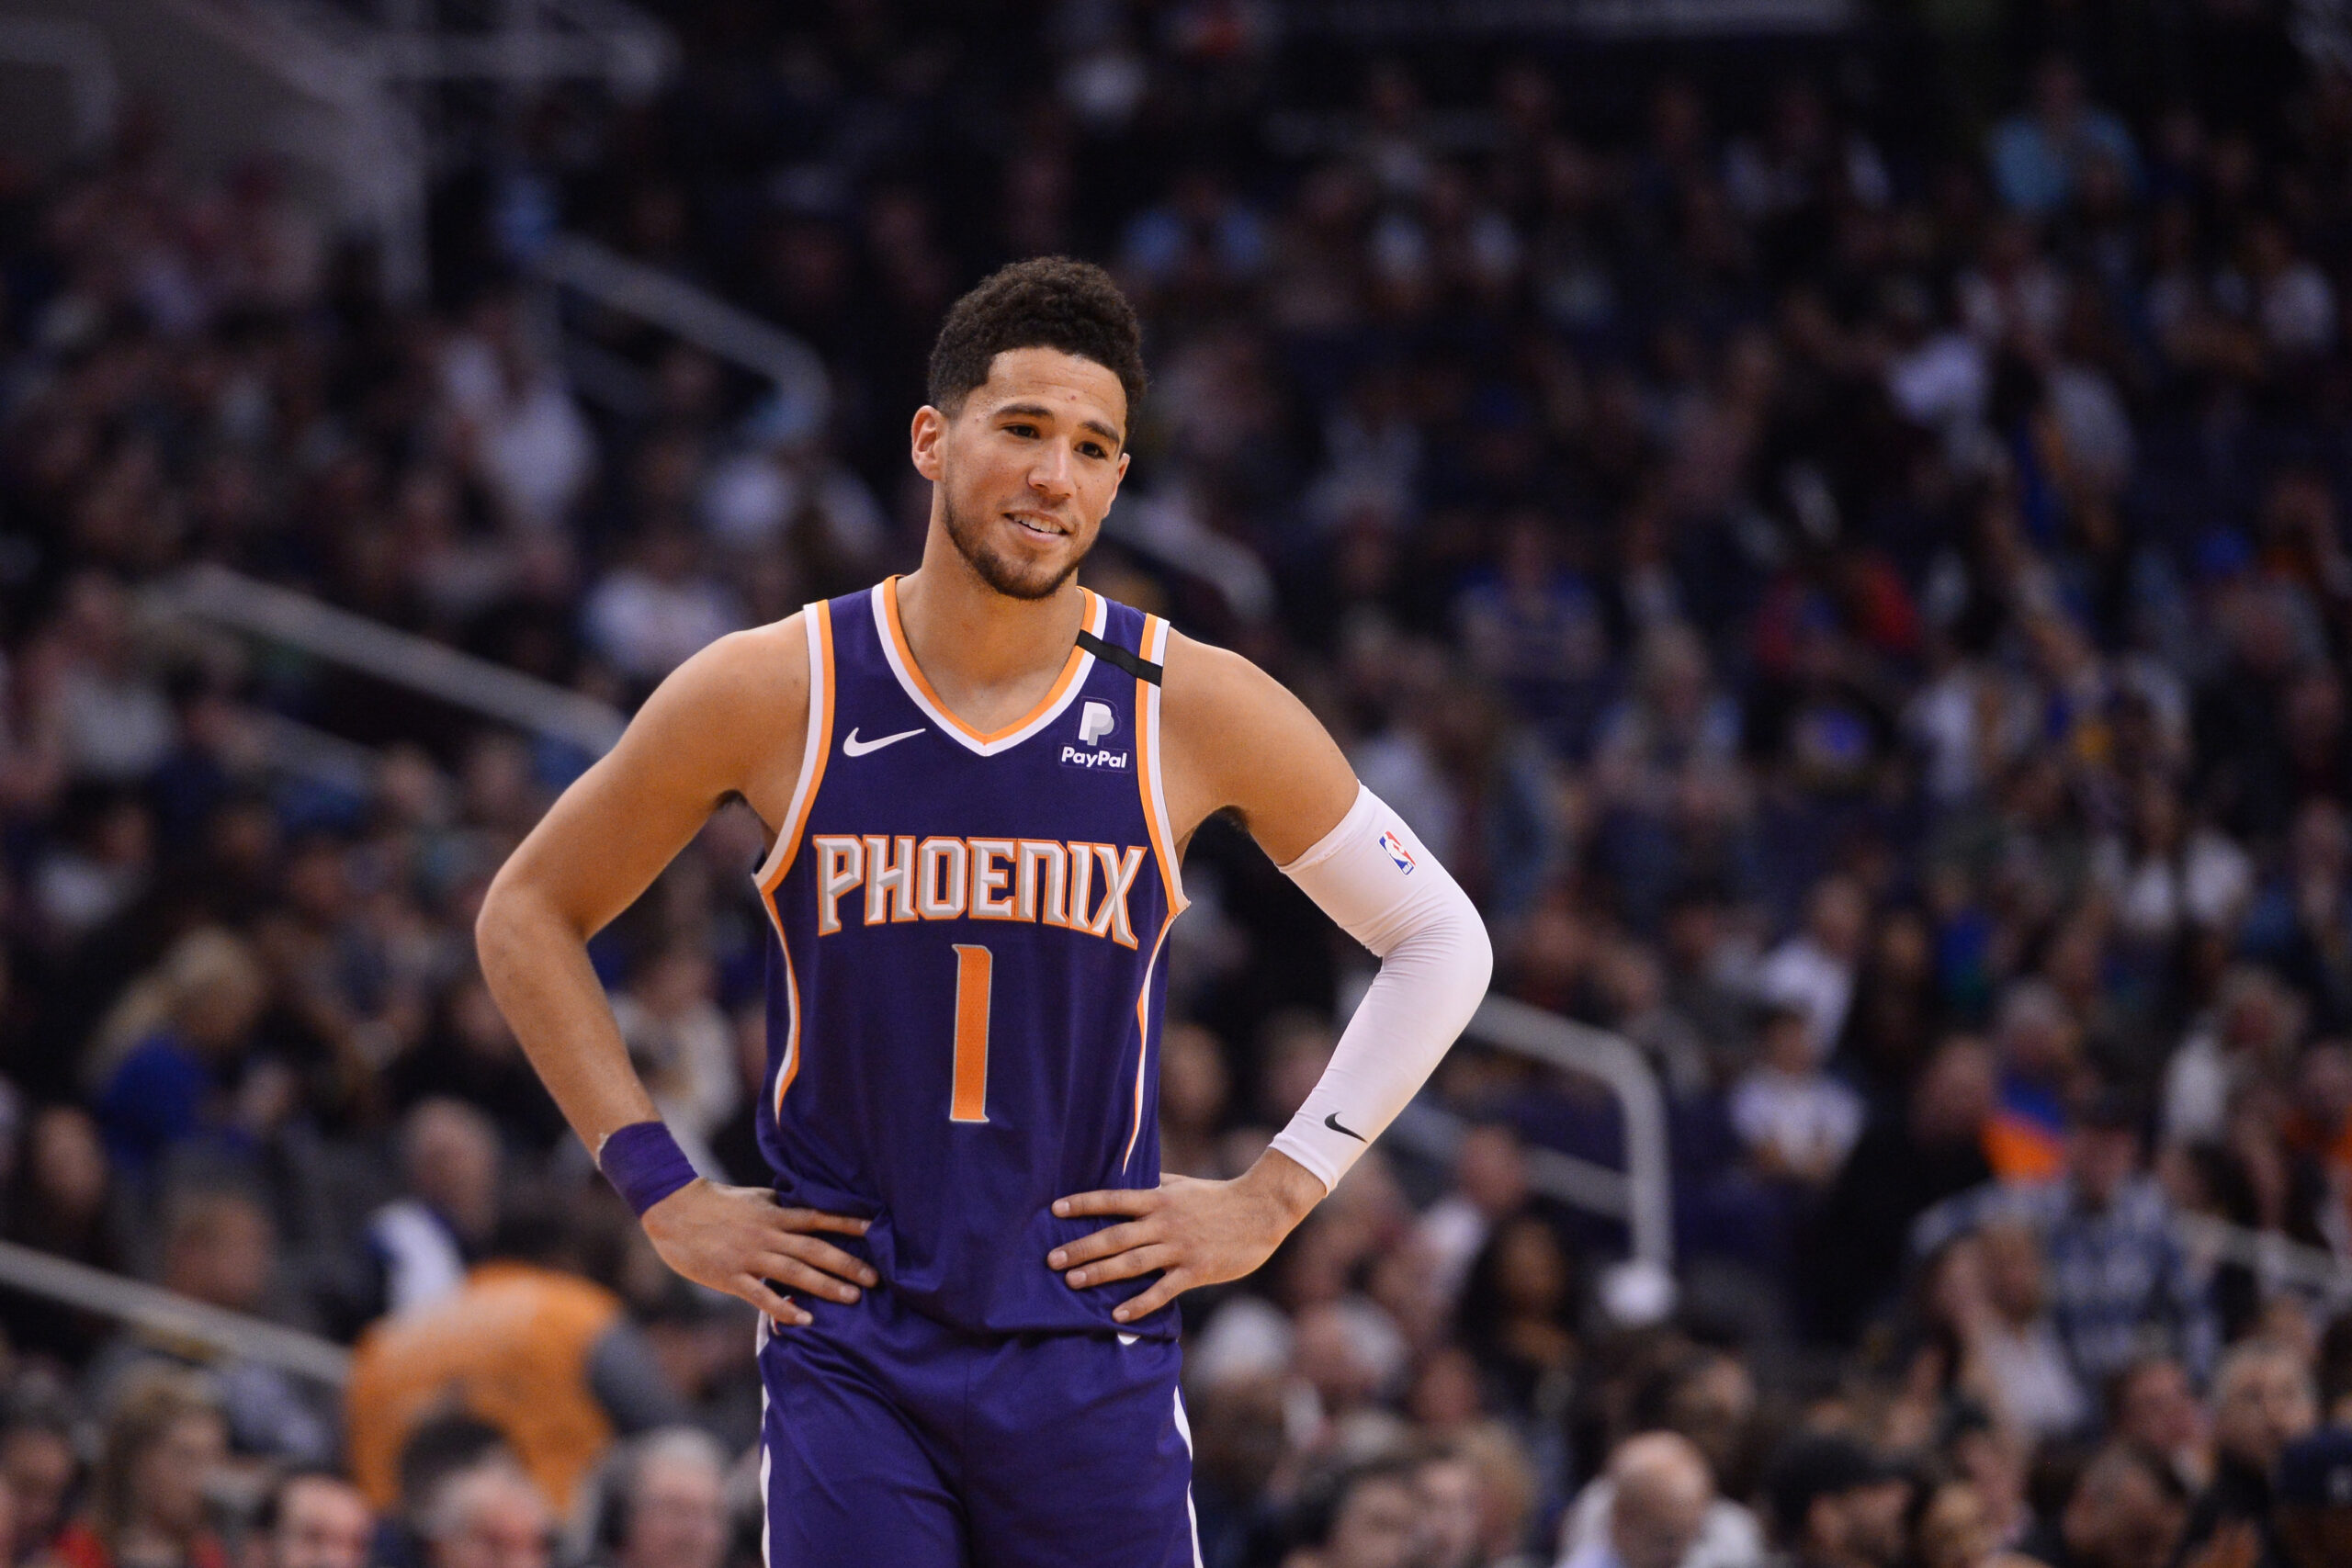 Without Devin Booker, the Suns are in trouble against the Pelicans